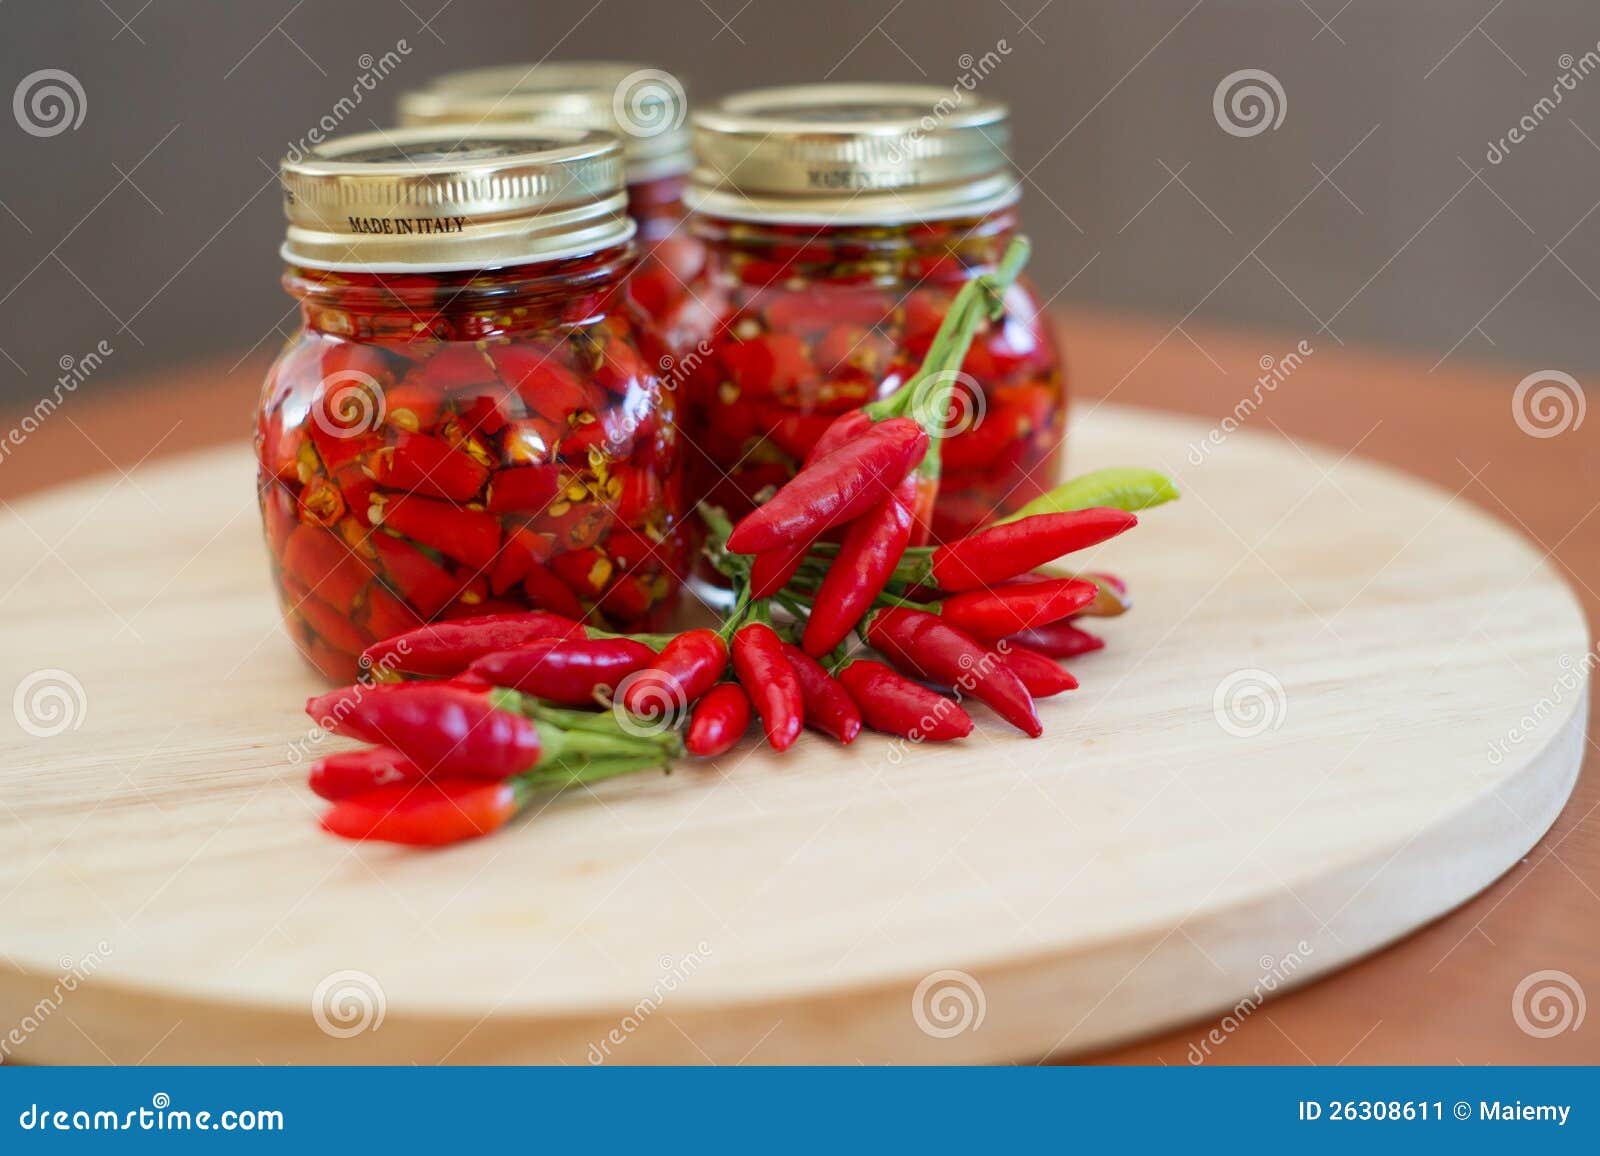 calabrian peppers in oil hot pepper very hot chili